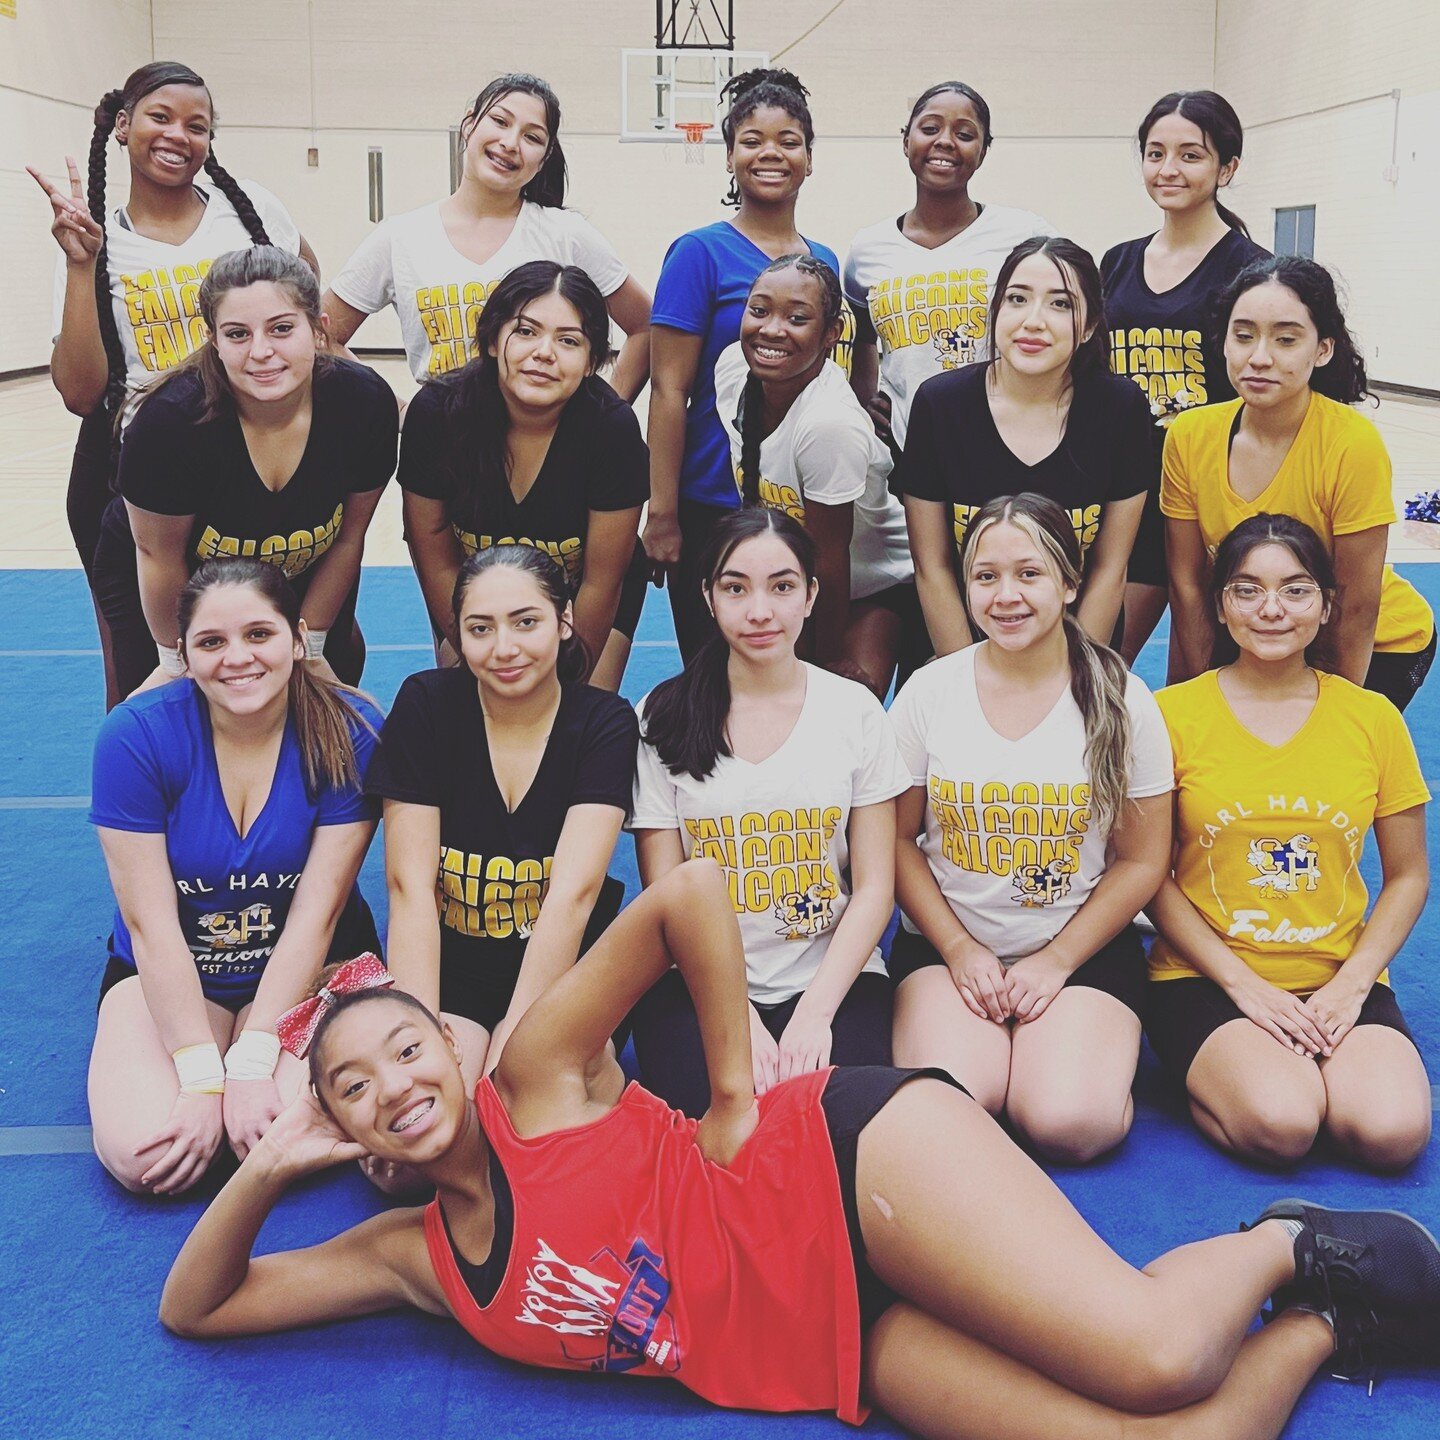 These Falcons put in WORK! So fun putting on a 2-day home camp for @chhs1957 cheerleaders. 💪🏽 From the sweat and soreness, to the fun, it was our honor to elevate your squad in every way! 💙💛